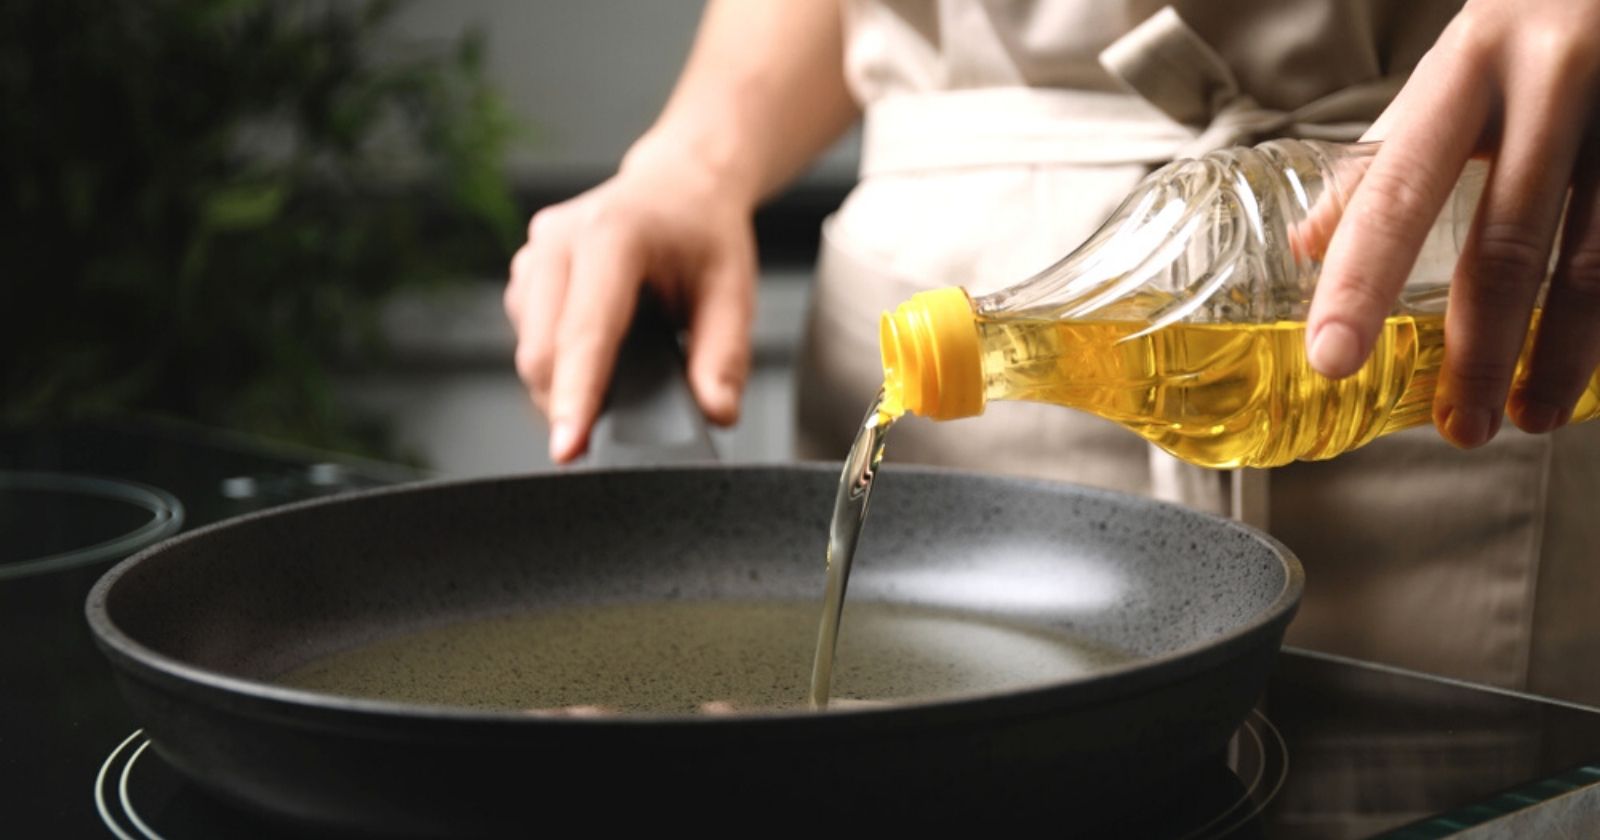 Shortage of sunflower oil: here are 7 healthy alternatives to cook or flavor your dishes